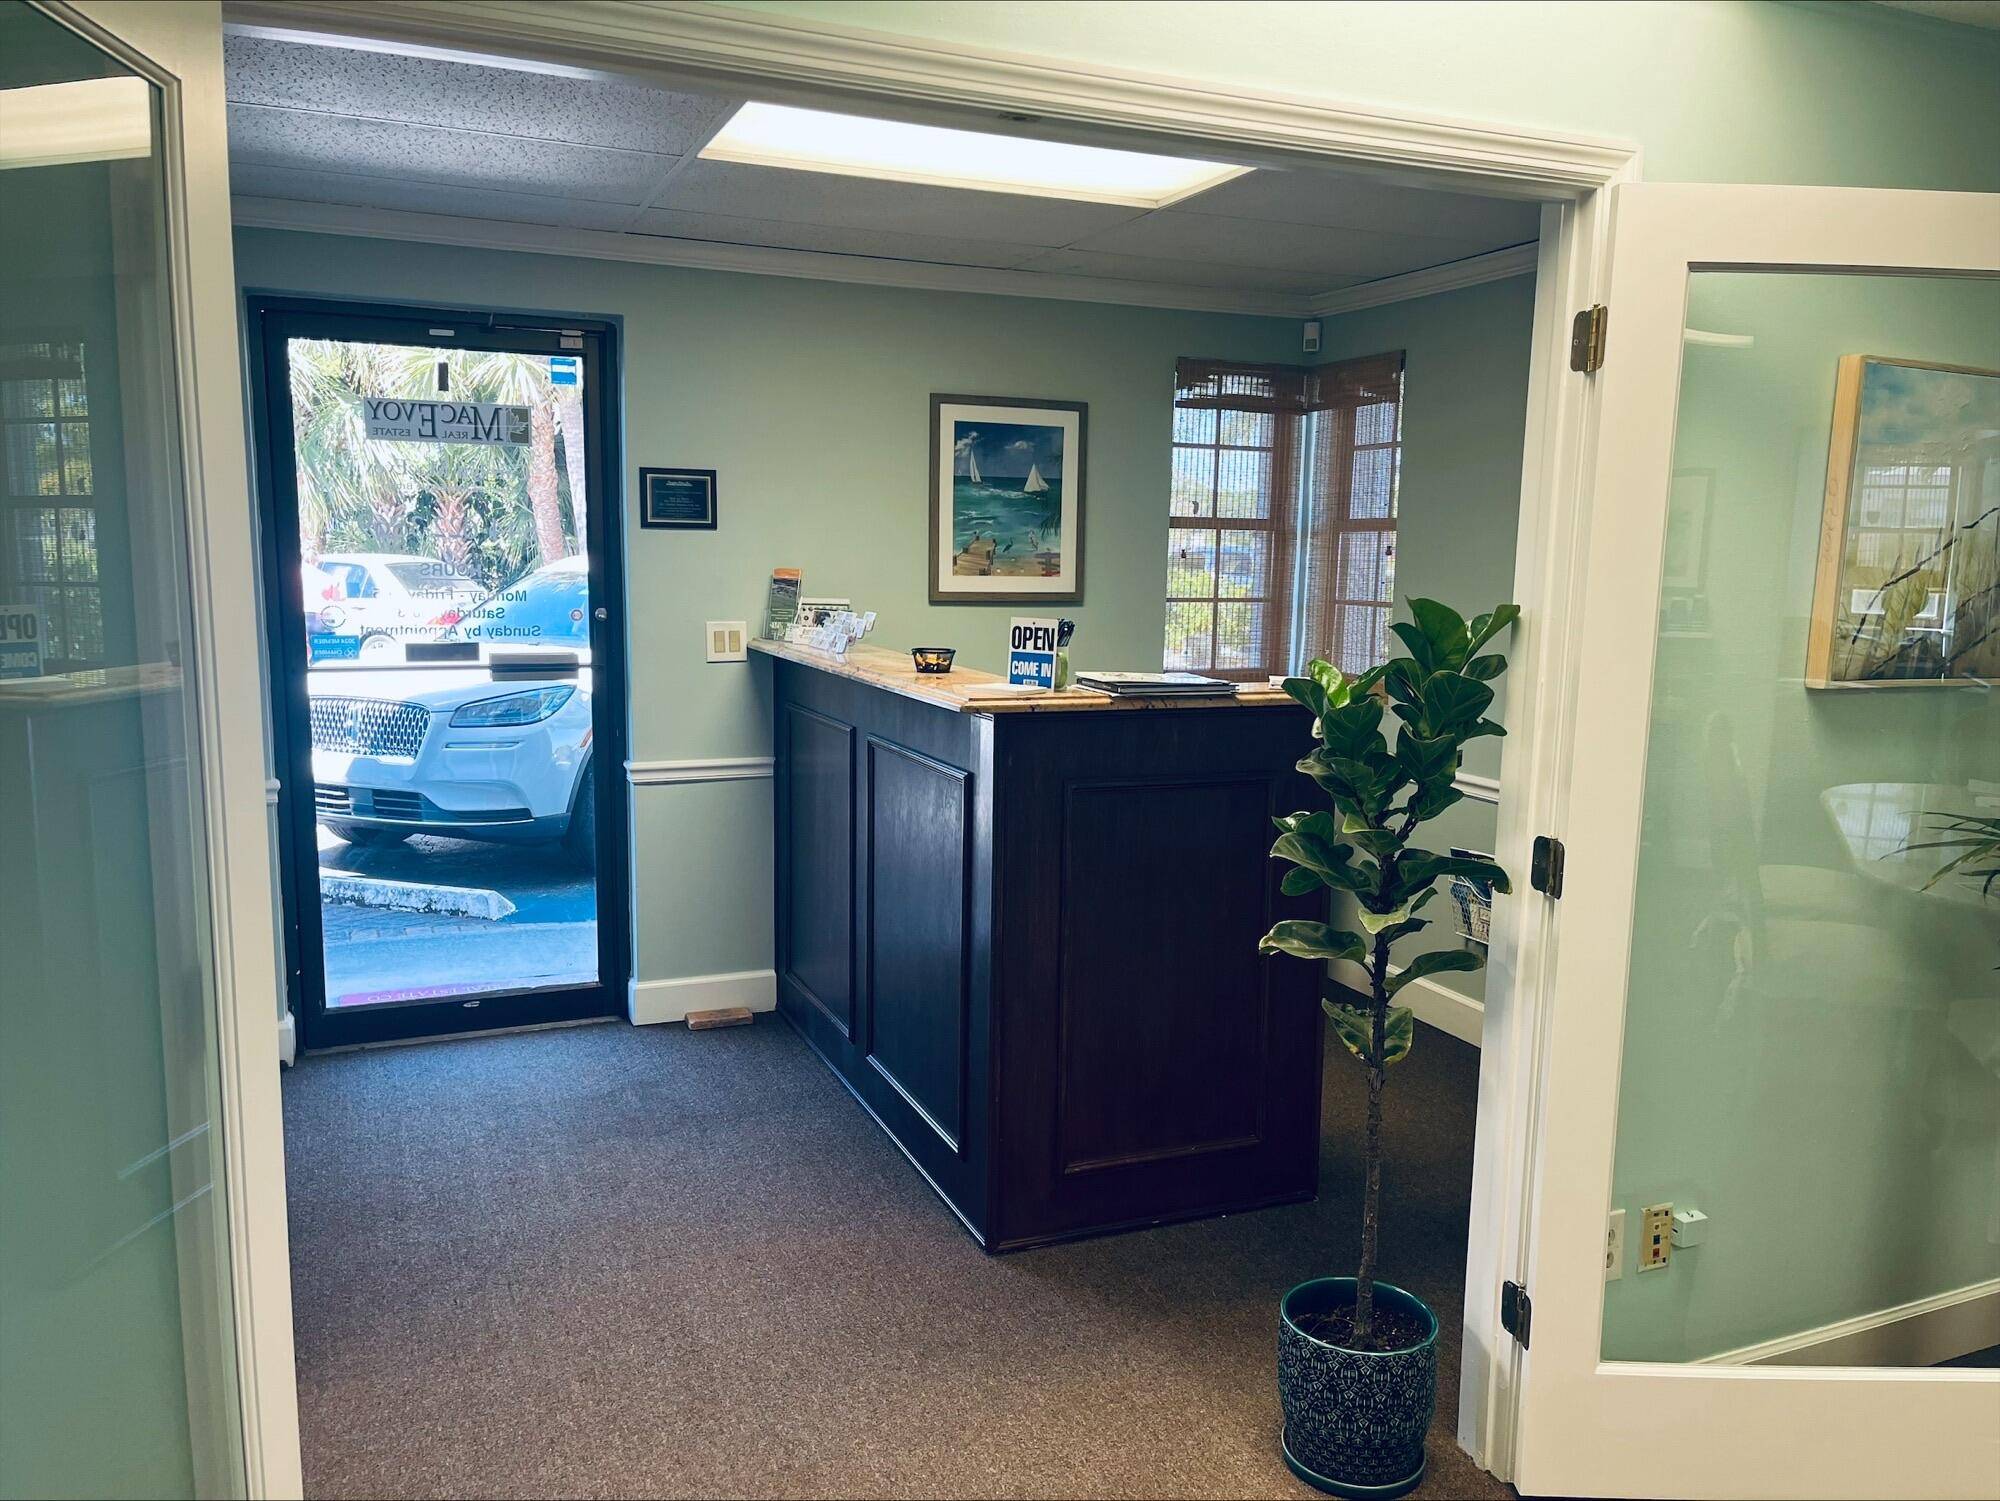 Renovated first floor office space in prime downtown location w 2 private offices, conference room, great room office space, private bath, kitchen area, and large storage closet.